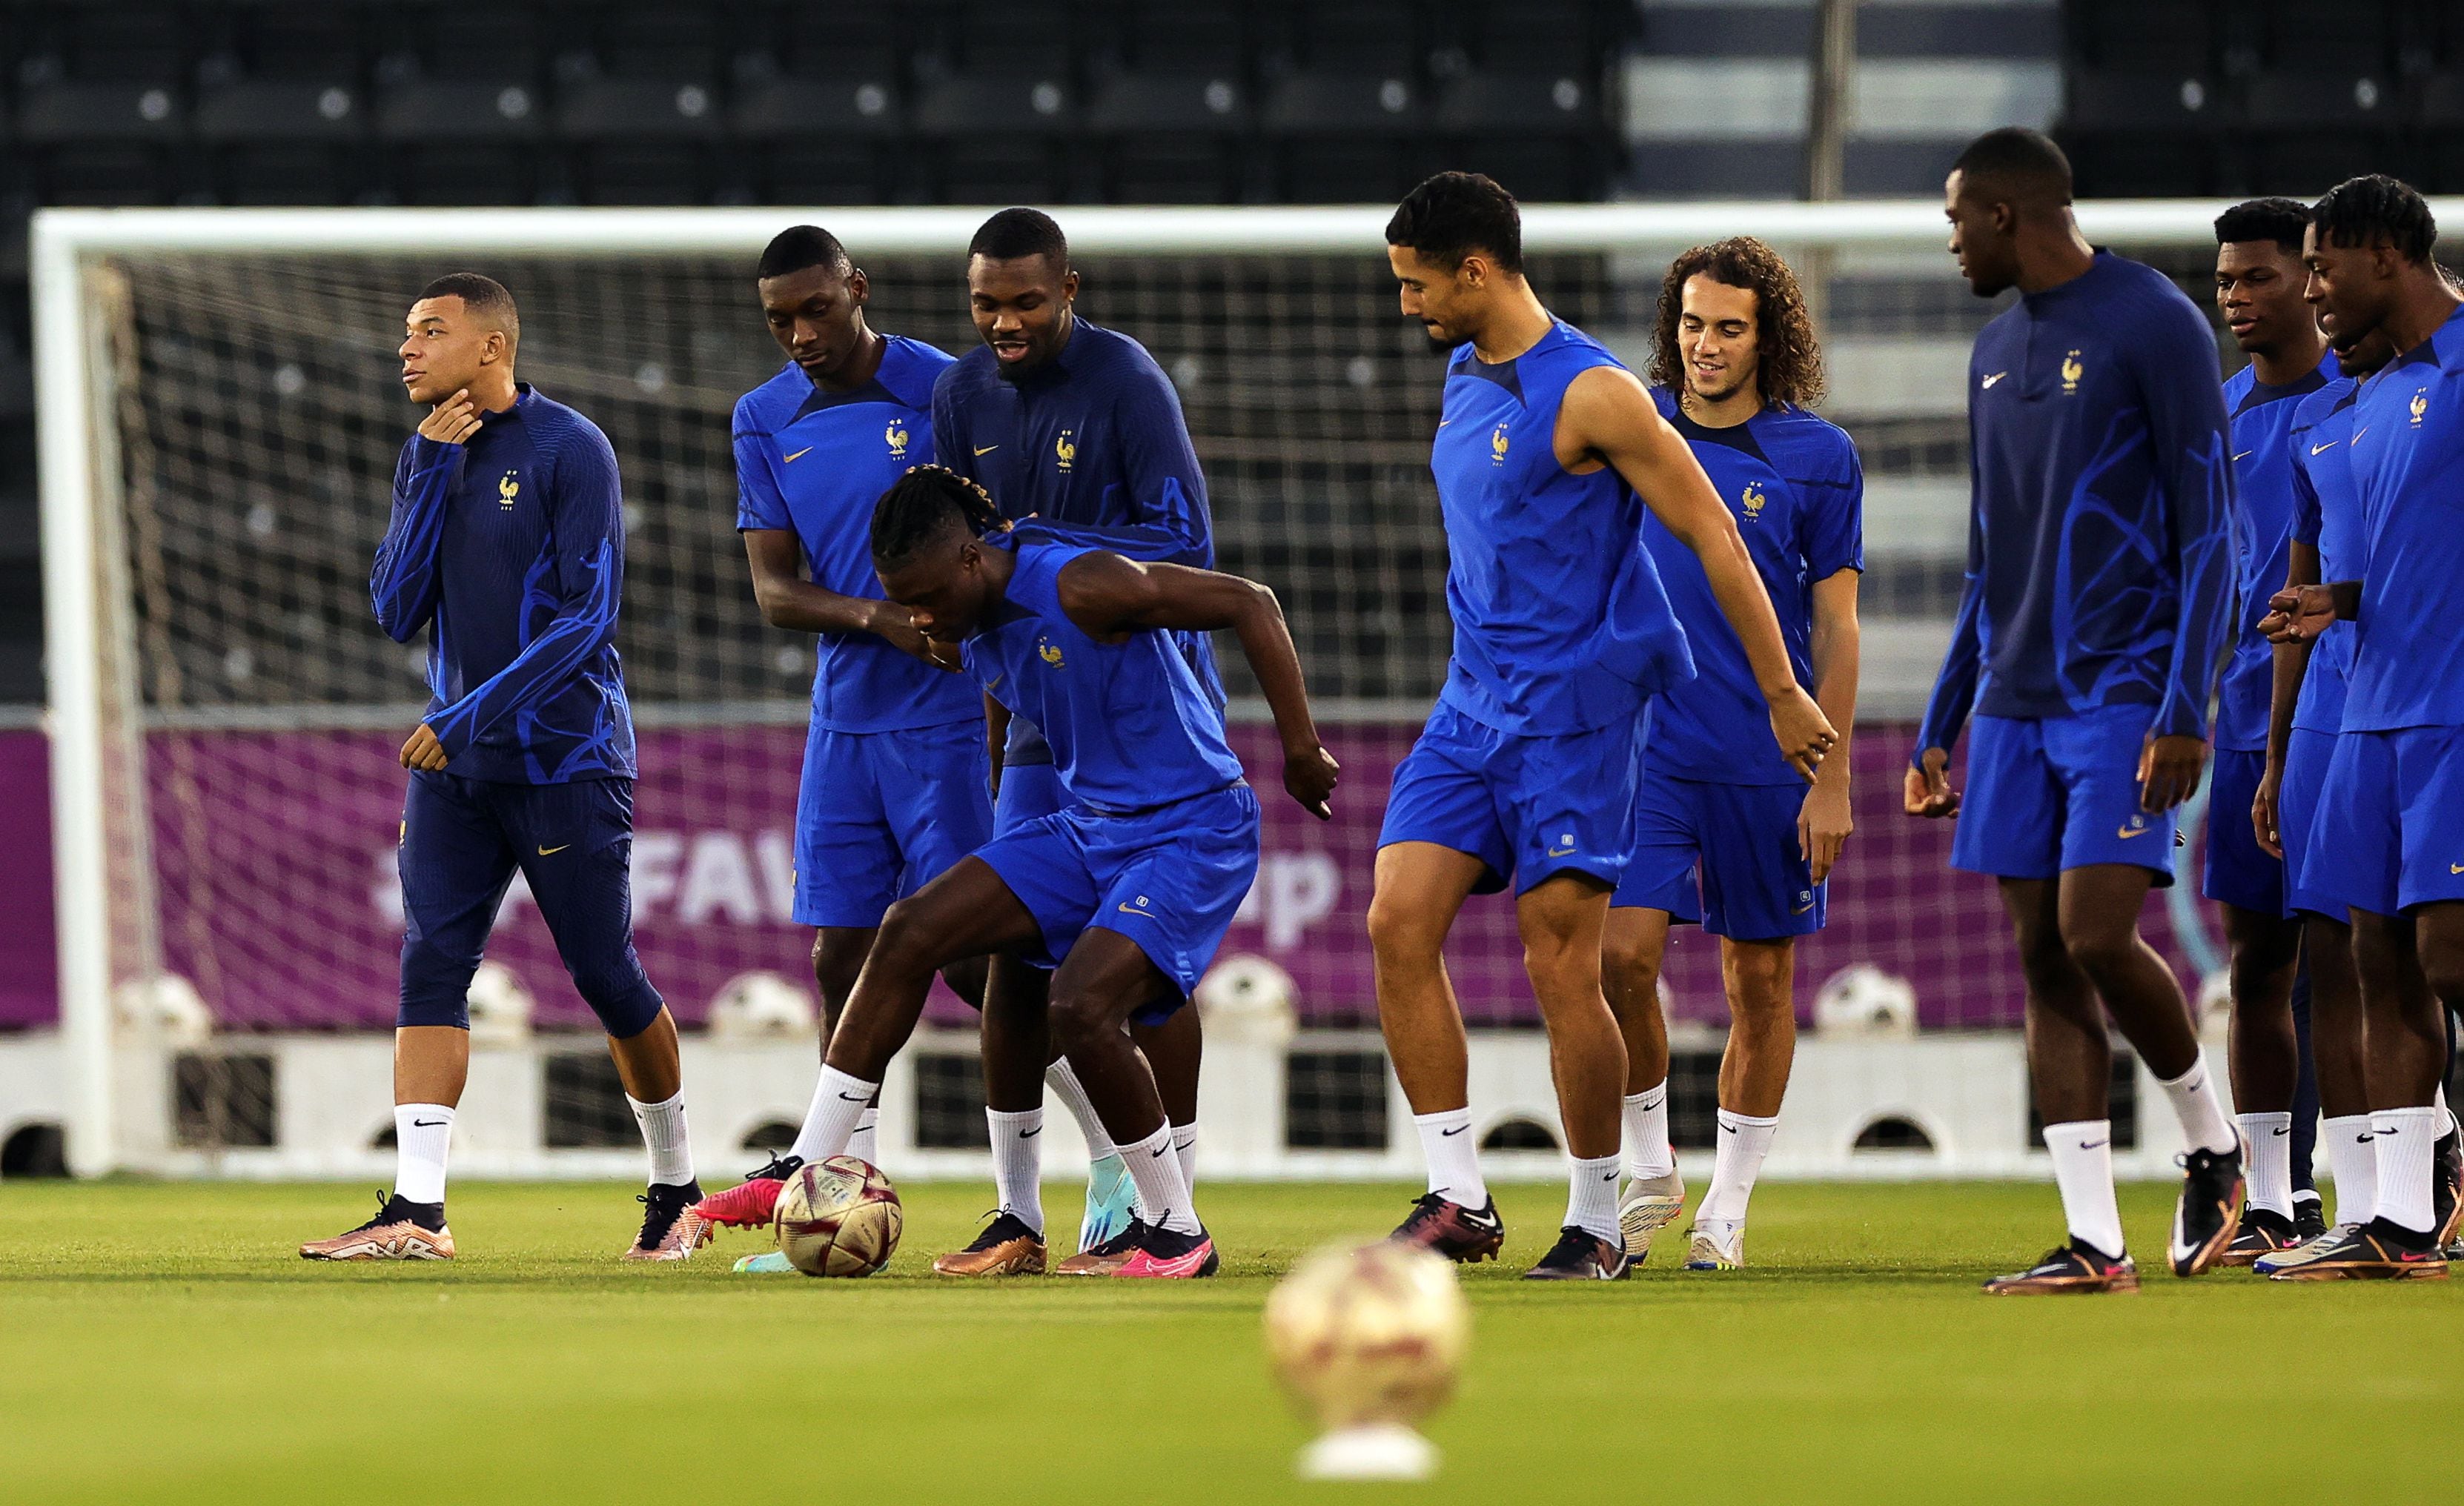 Doha (Qatar), 17/12/2022.- France's Kylian Mbappe (L) and teammates attend their training session in Doha, Qatar, 17 December 2022. France will face Argentina in their FIFA World Cup 2022 Final in Lusail on 18 December. (Mundial de Fútbol, Francia, Estados Unidos, Catar) EFE/EPA/Friedemann Vogel
